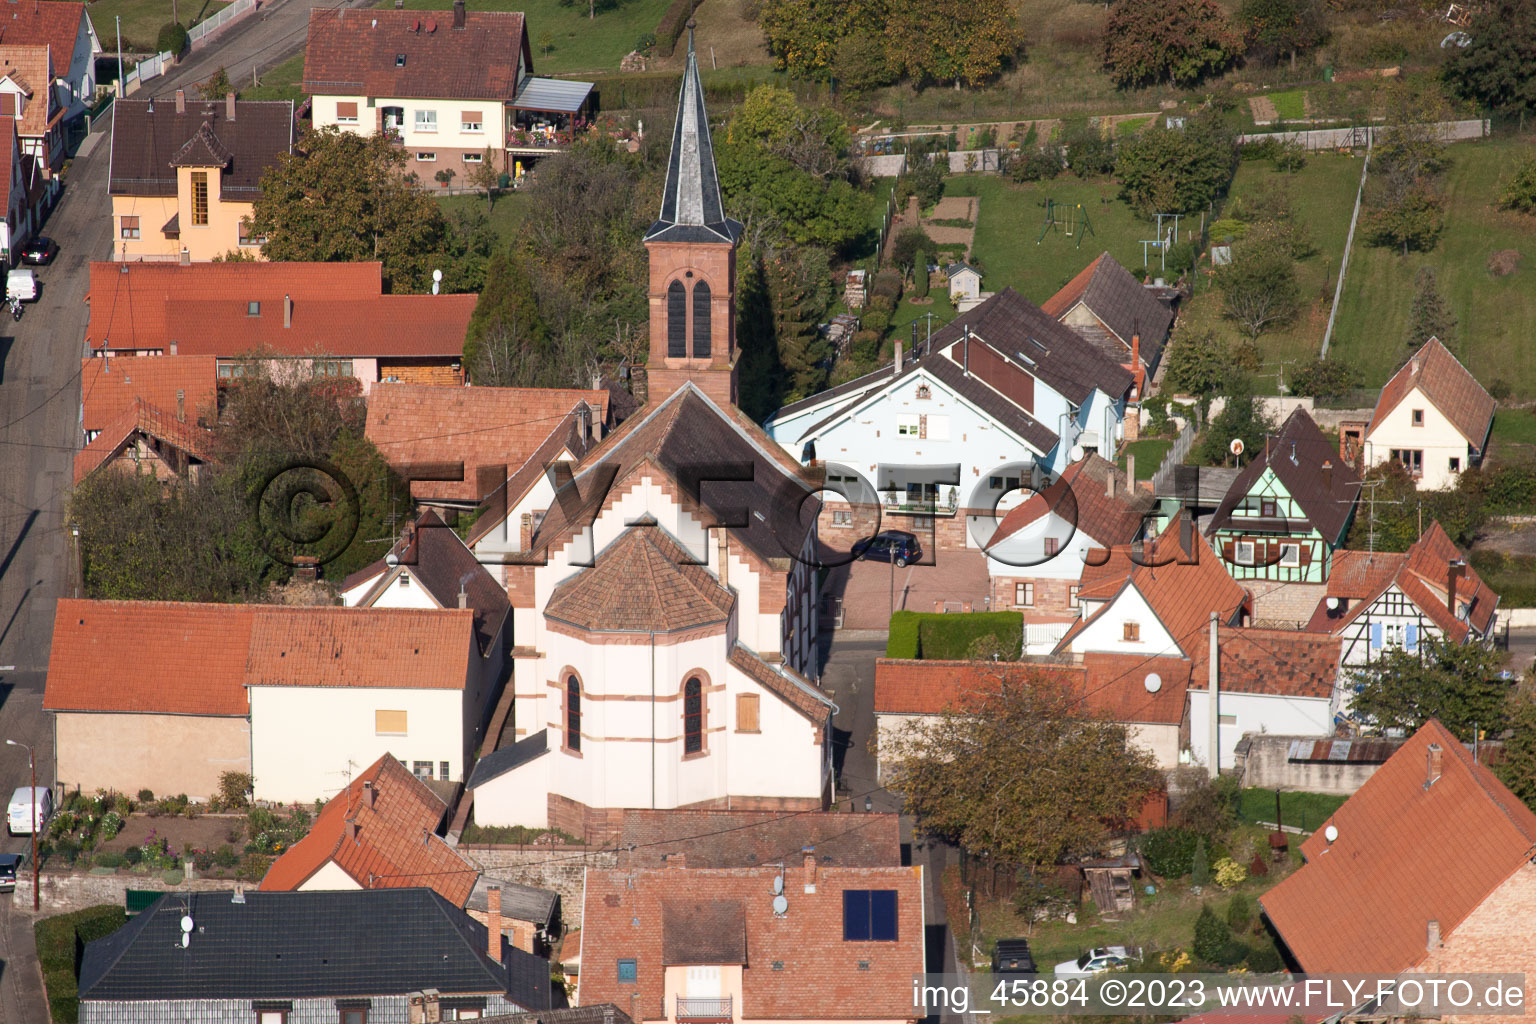 Gœrsdorf in the state Bas-Rhin, France from the drone perspective